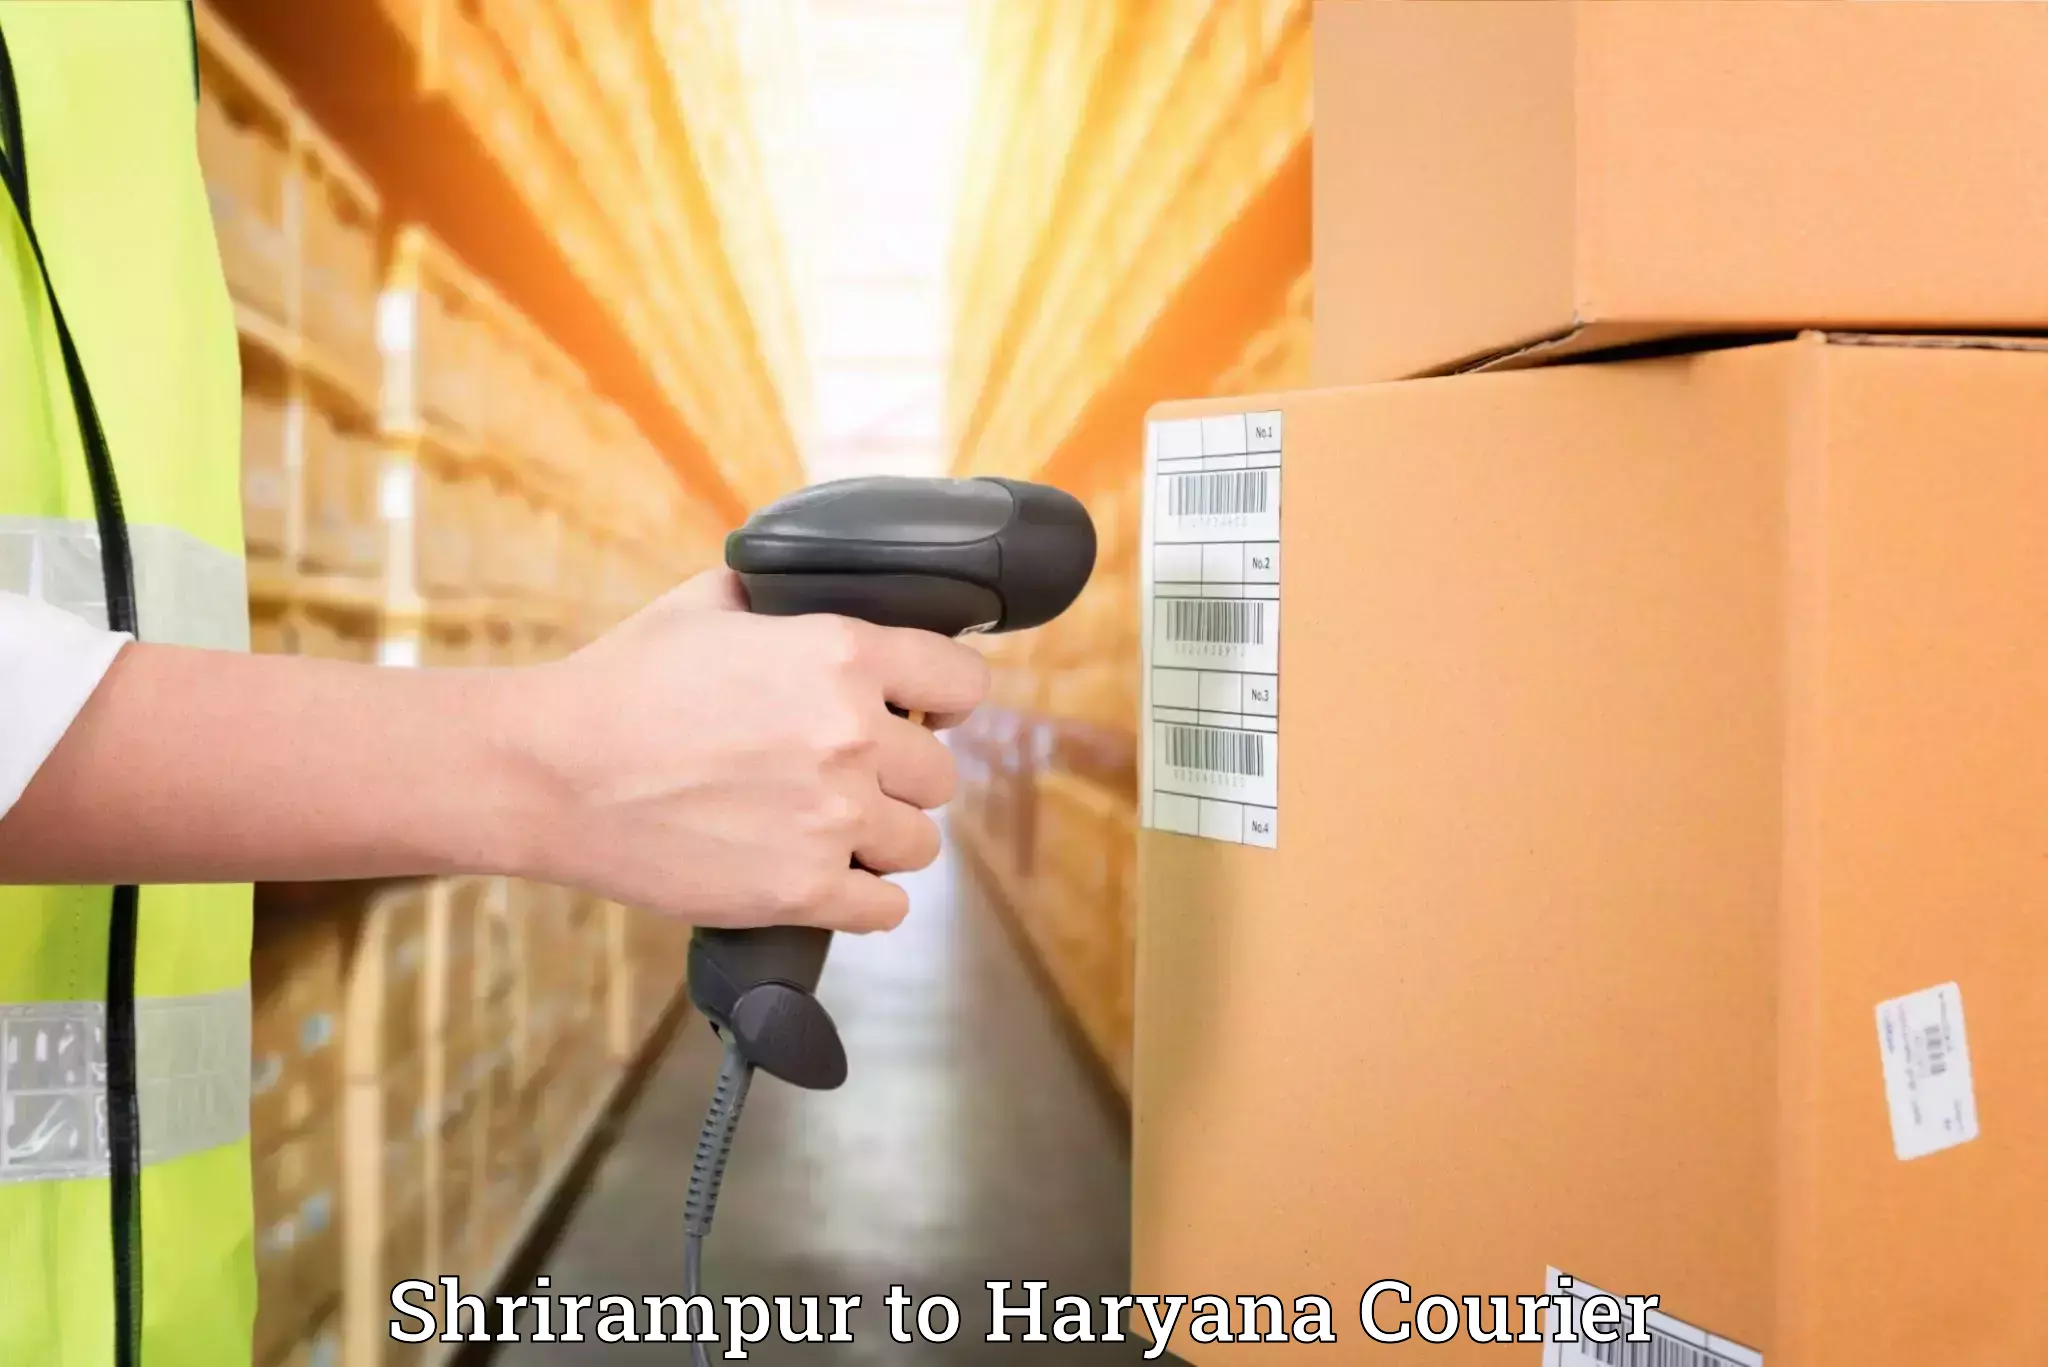 Home relocation experts Shrirampur to NCR Haryana